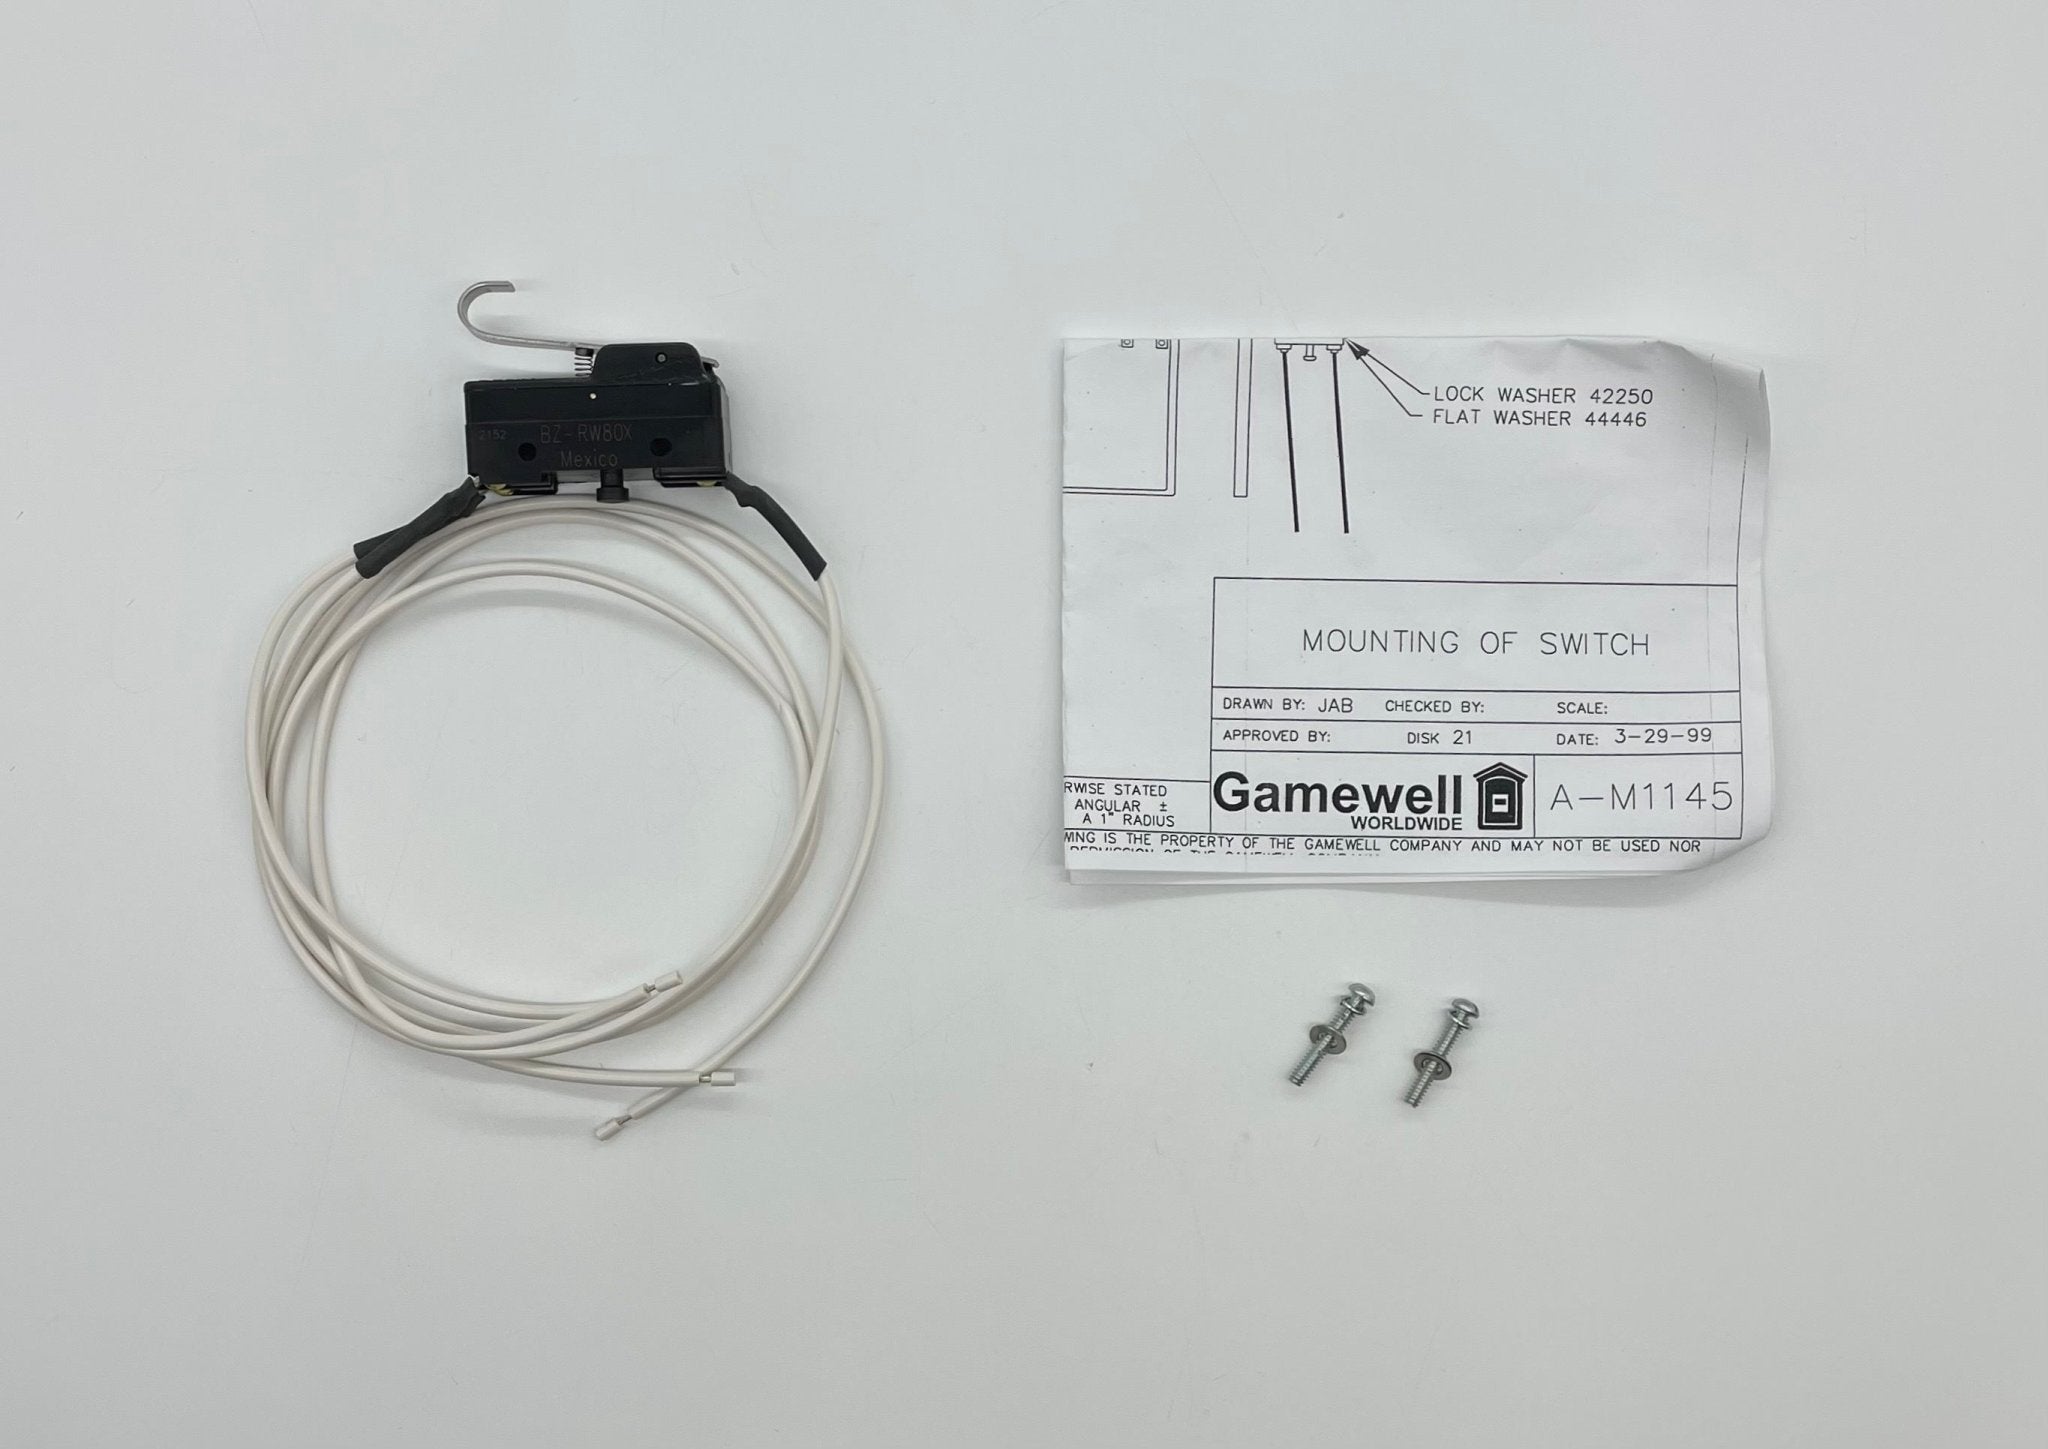 Gamewell-FCI GWMD99-2 - The Fire Alarm Supplier